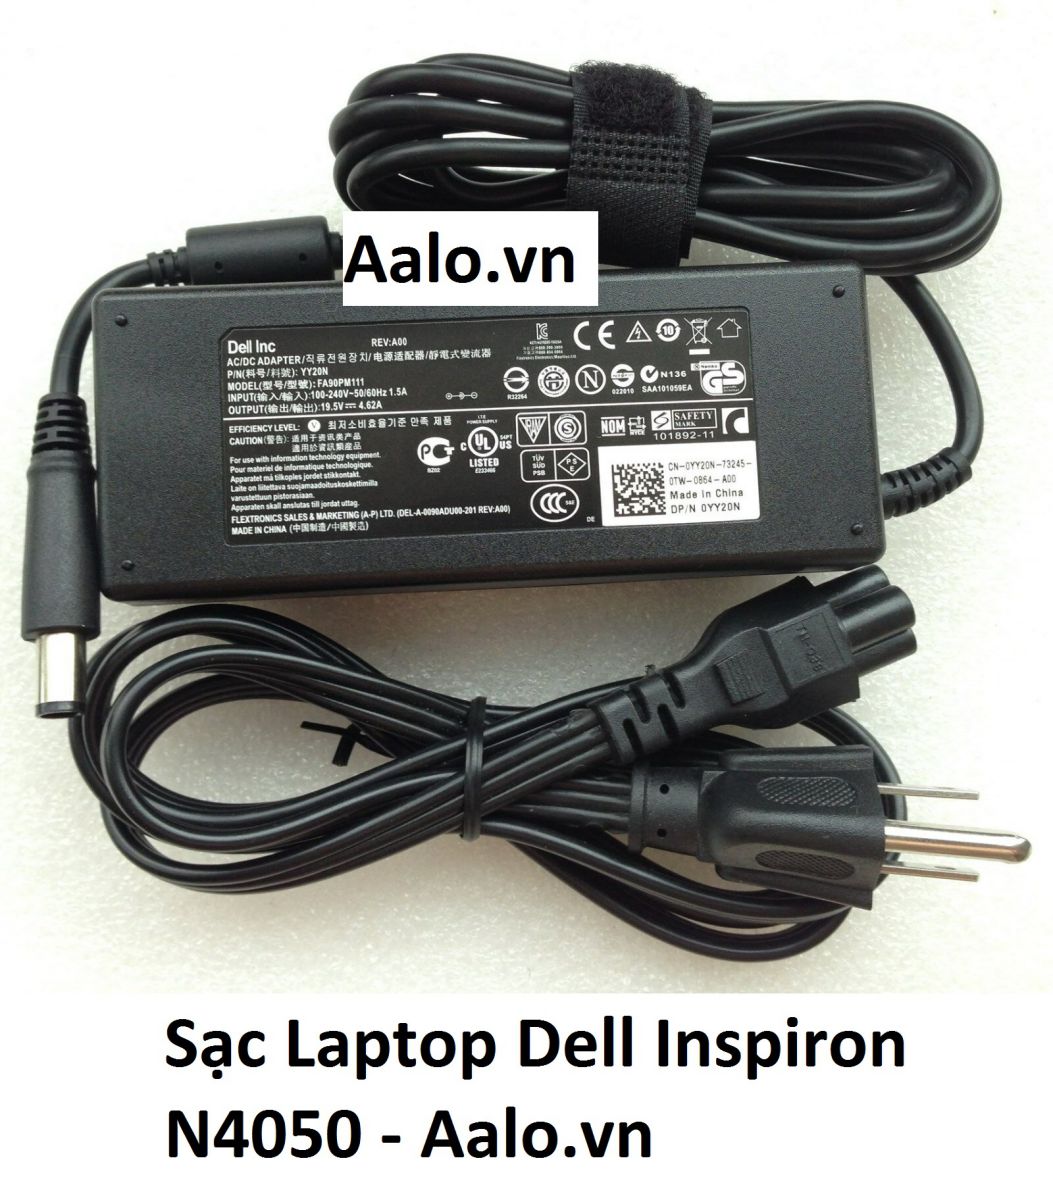 Sạc Laptop Dell Inspiron N4050 - Aalo.vn